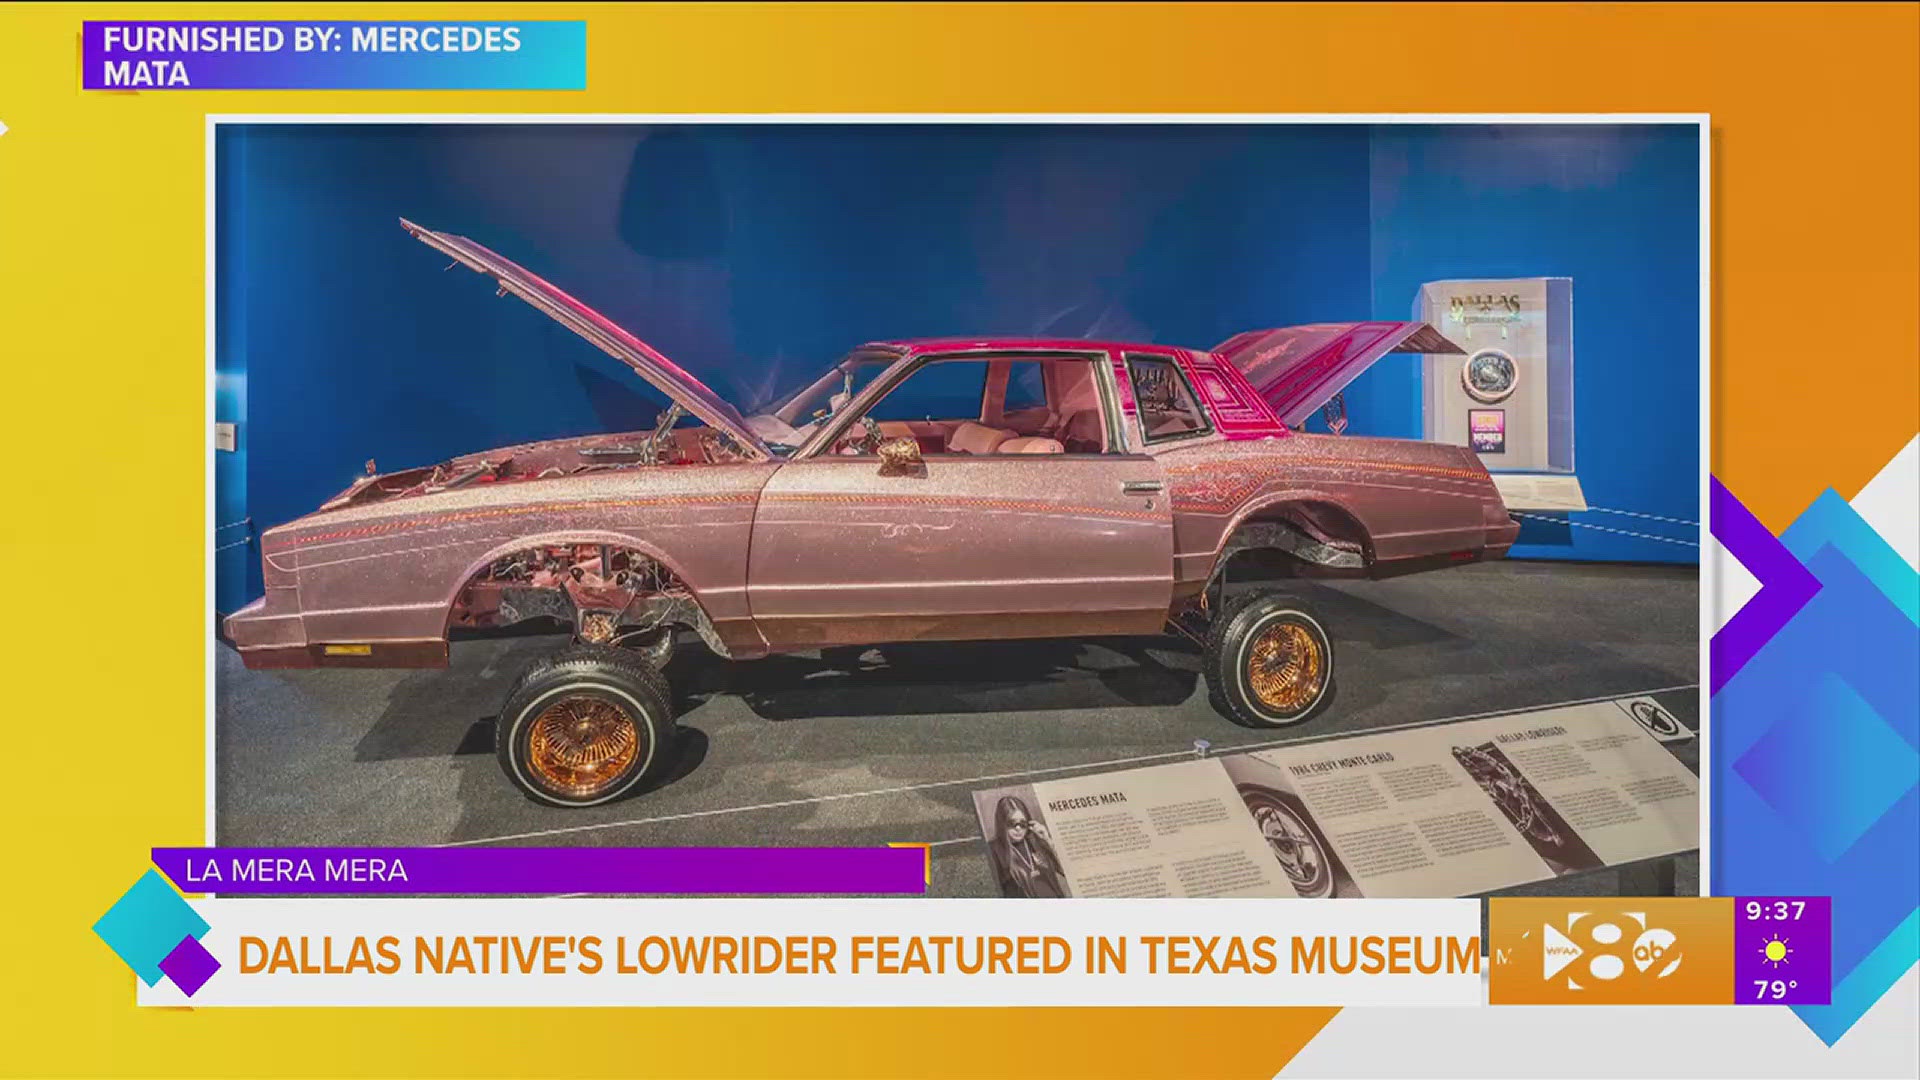 20-year-old Mercedes Mata is the only woman, Dallas native, and youngest person to have her lowrider featured in a Museum. She tells us more about "La Mera Mera."